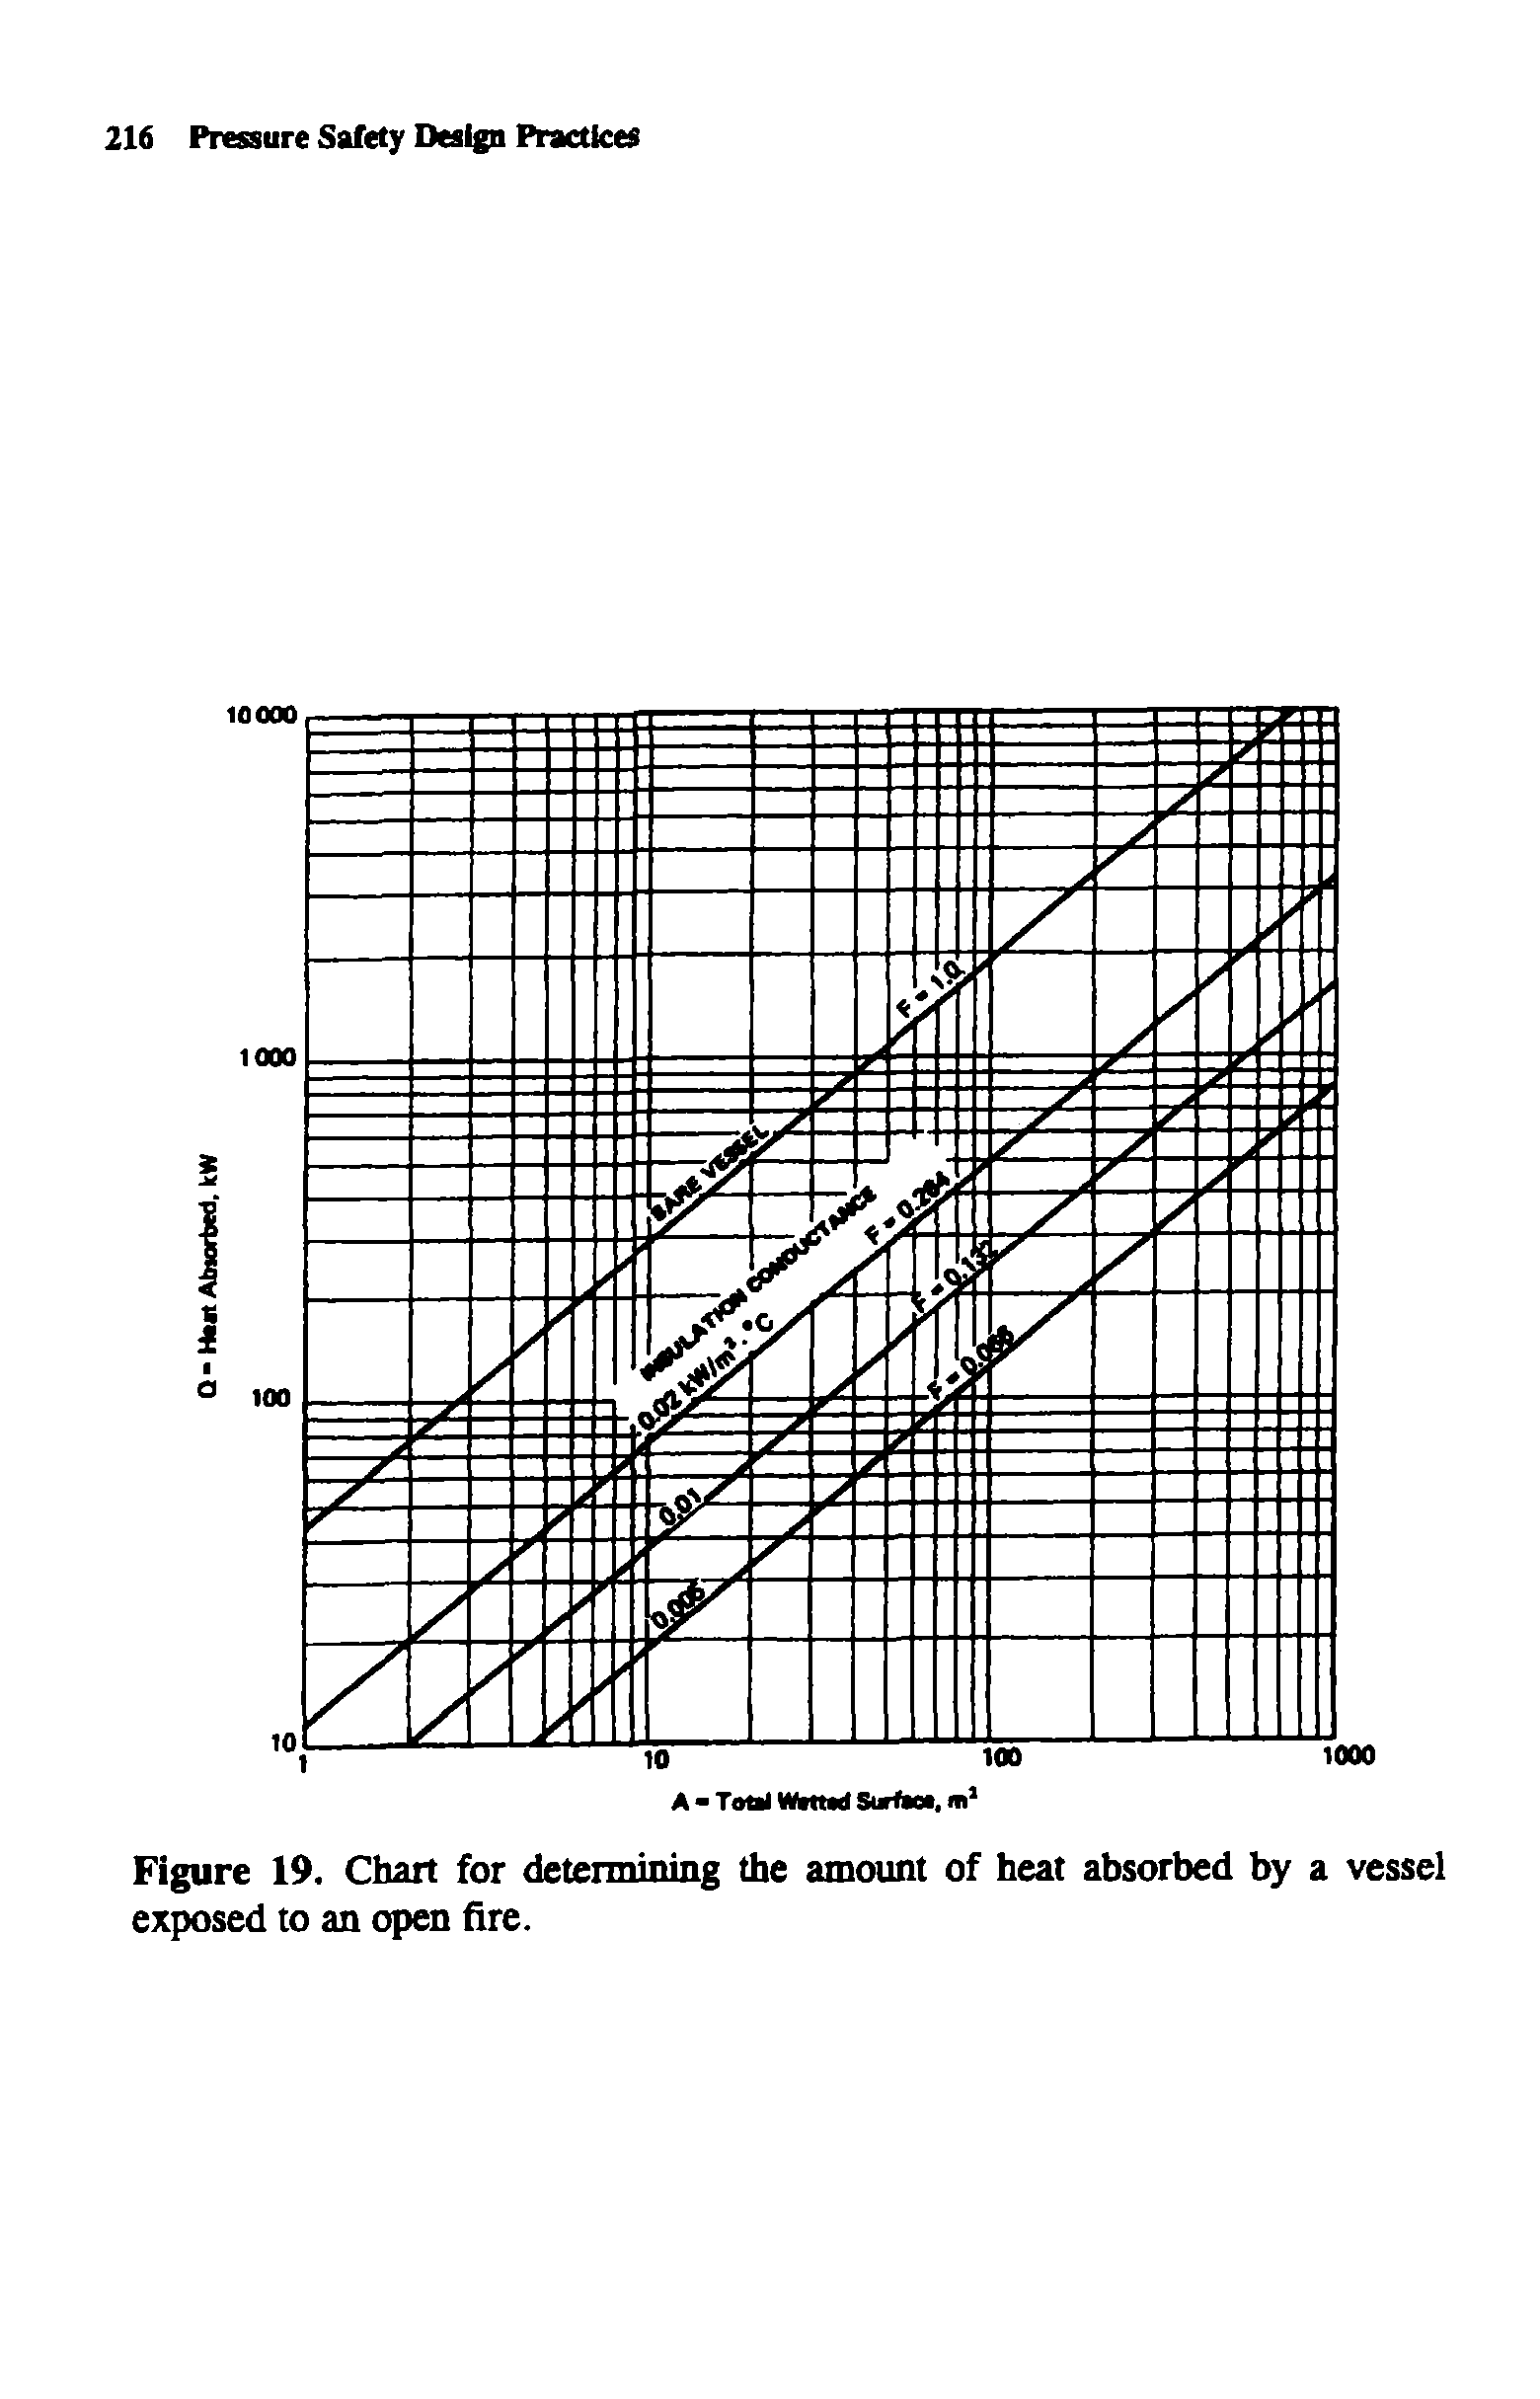 Figure 19. Chart for determining the amount of heat absorbed by a vessel exposed to an open fire.